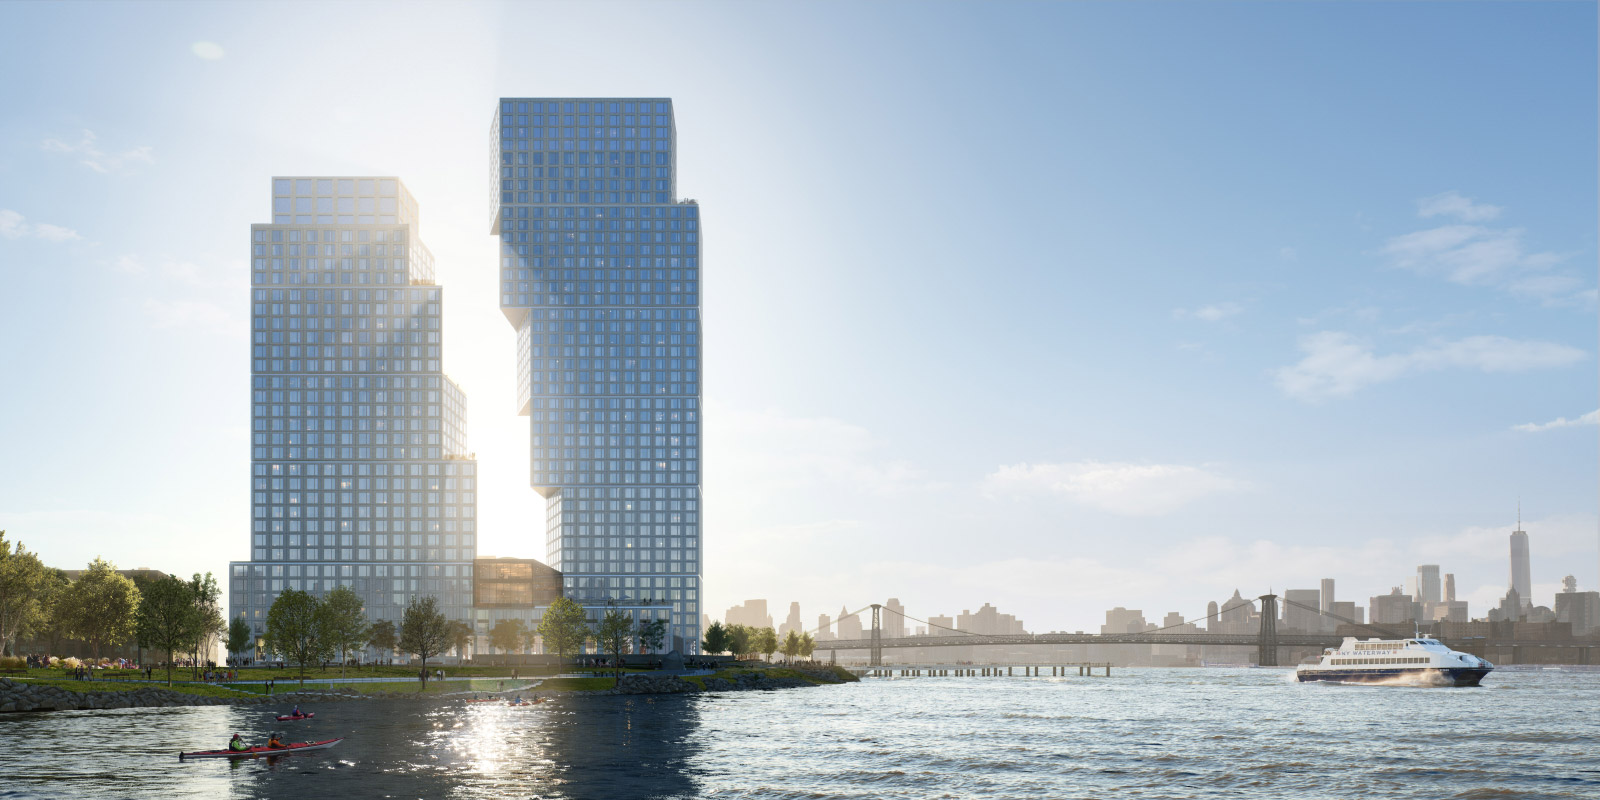 Rendering of two waterfront towers